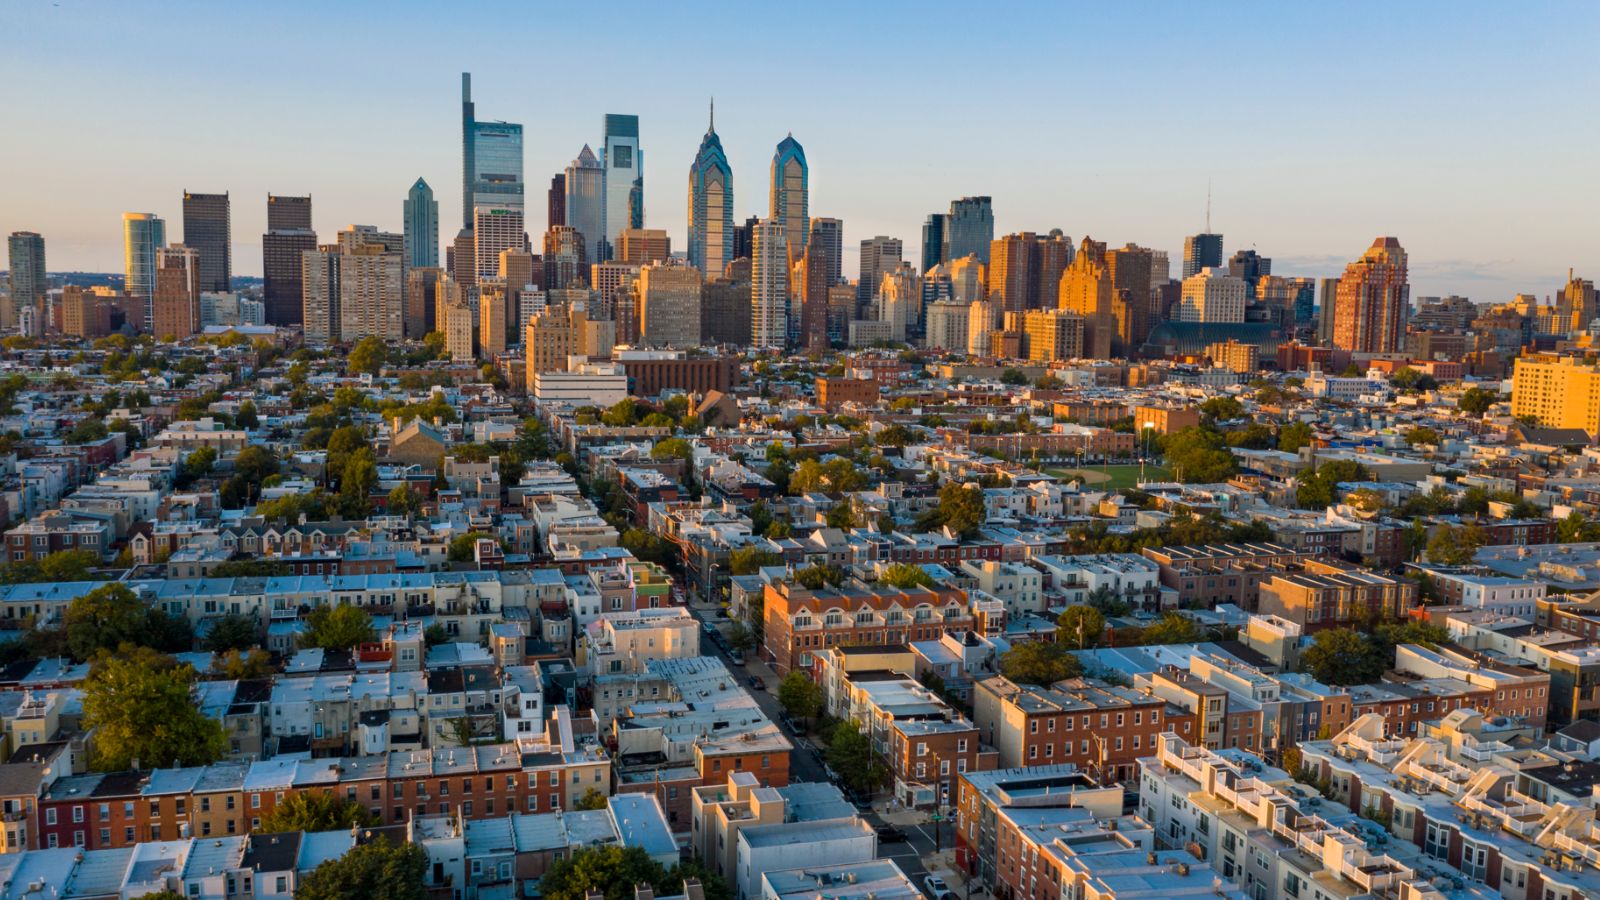 <p>Another historic city with an aging infrastructure that includes main roads and bridges into the city leads to major repairs, the inability to expand, and traffic. The most recent study puts Philly above LA on the traffic scale.</p>